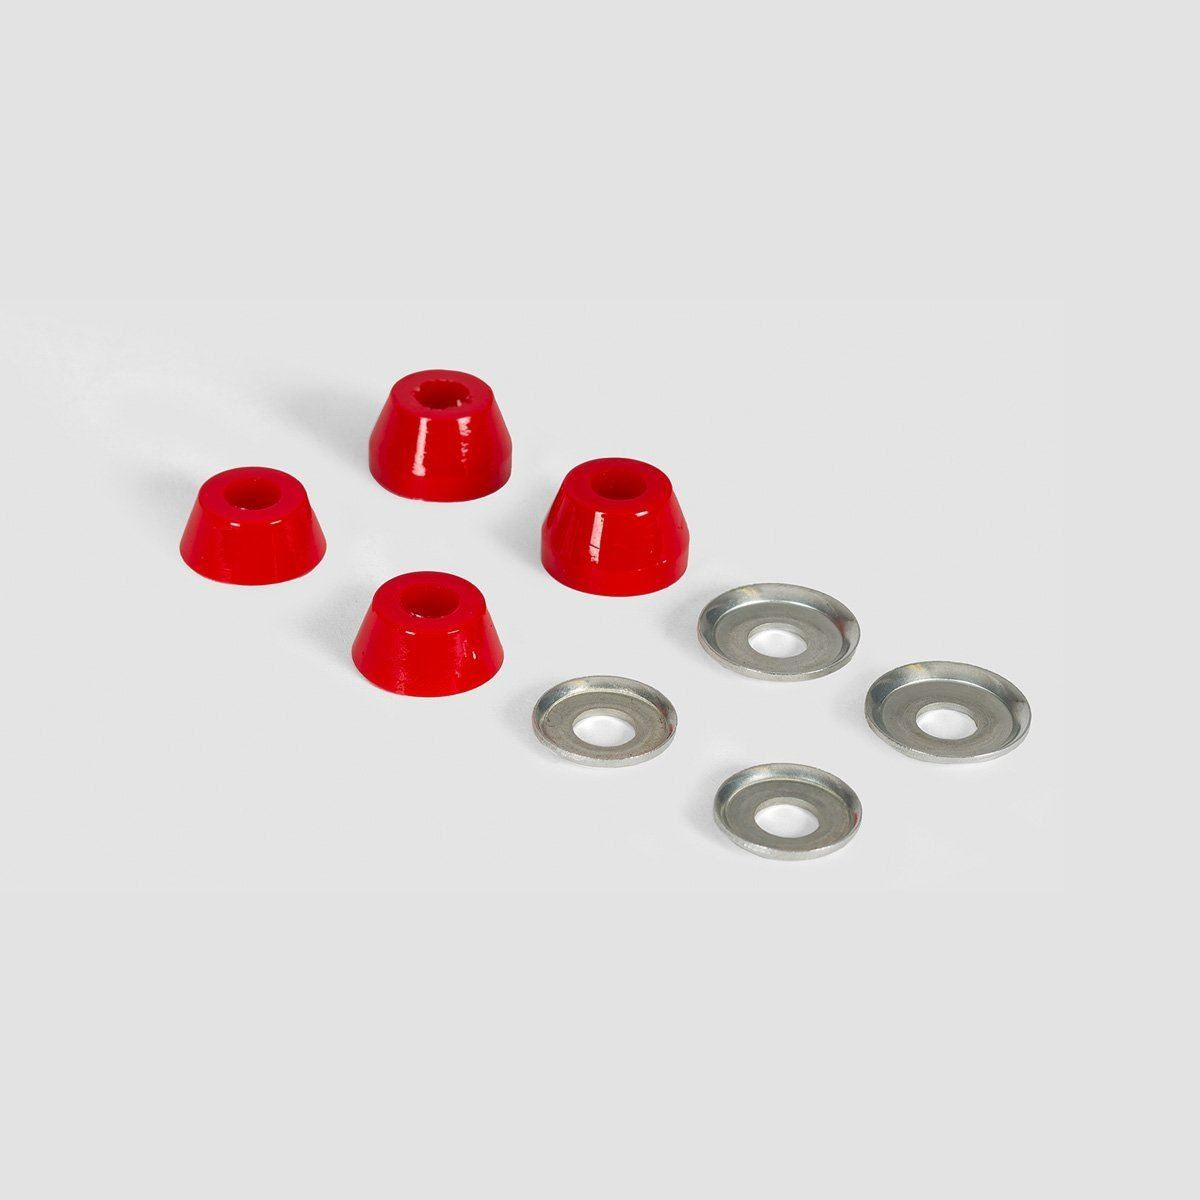 Independent Standard Conical Soft 88a Bushings Red